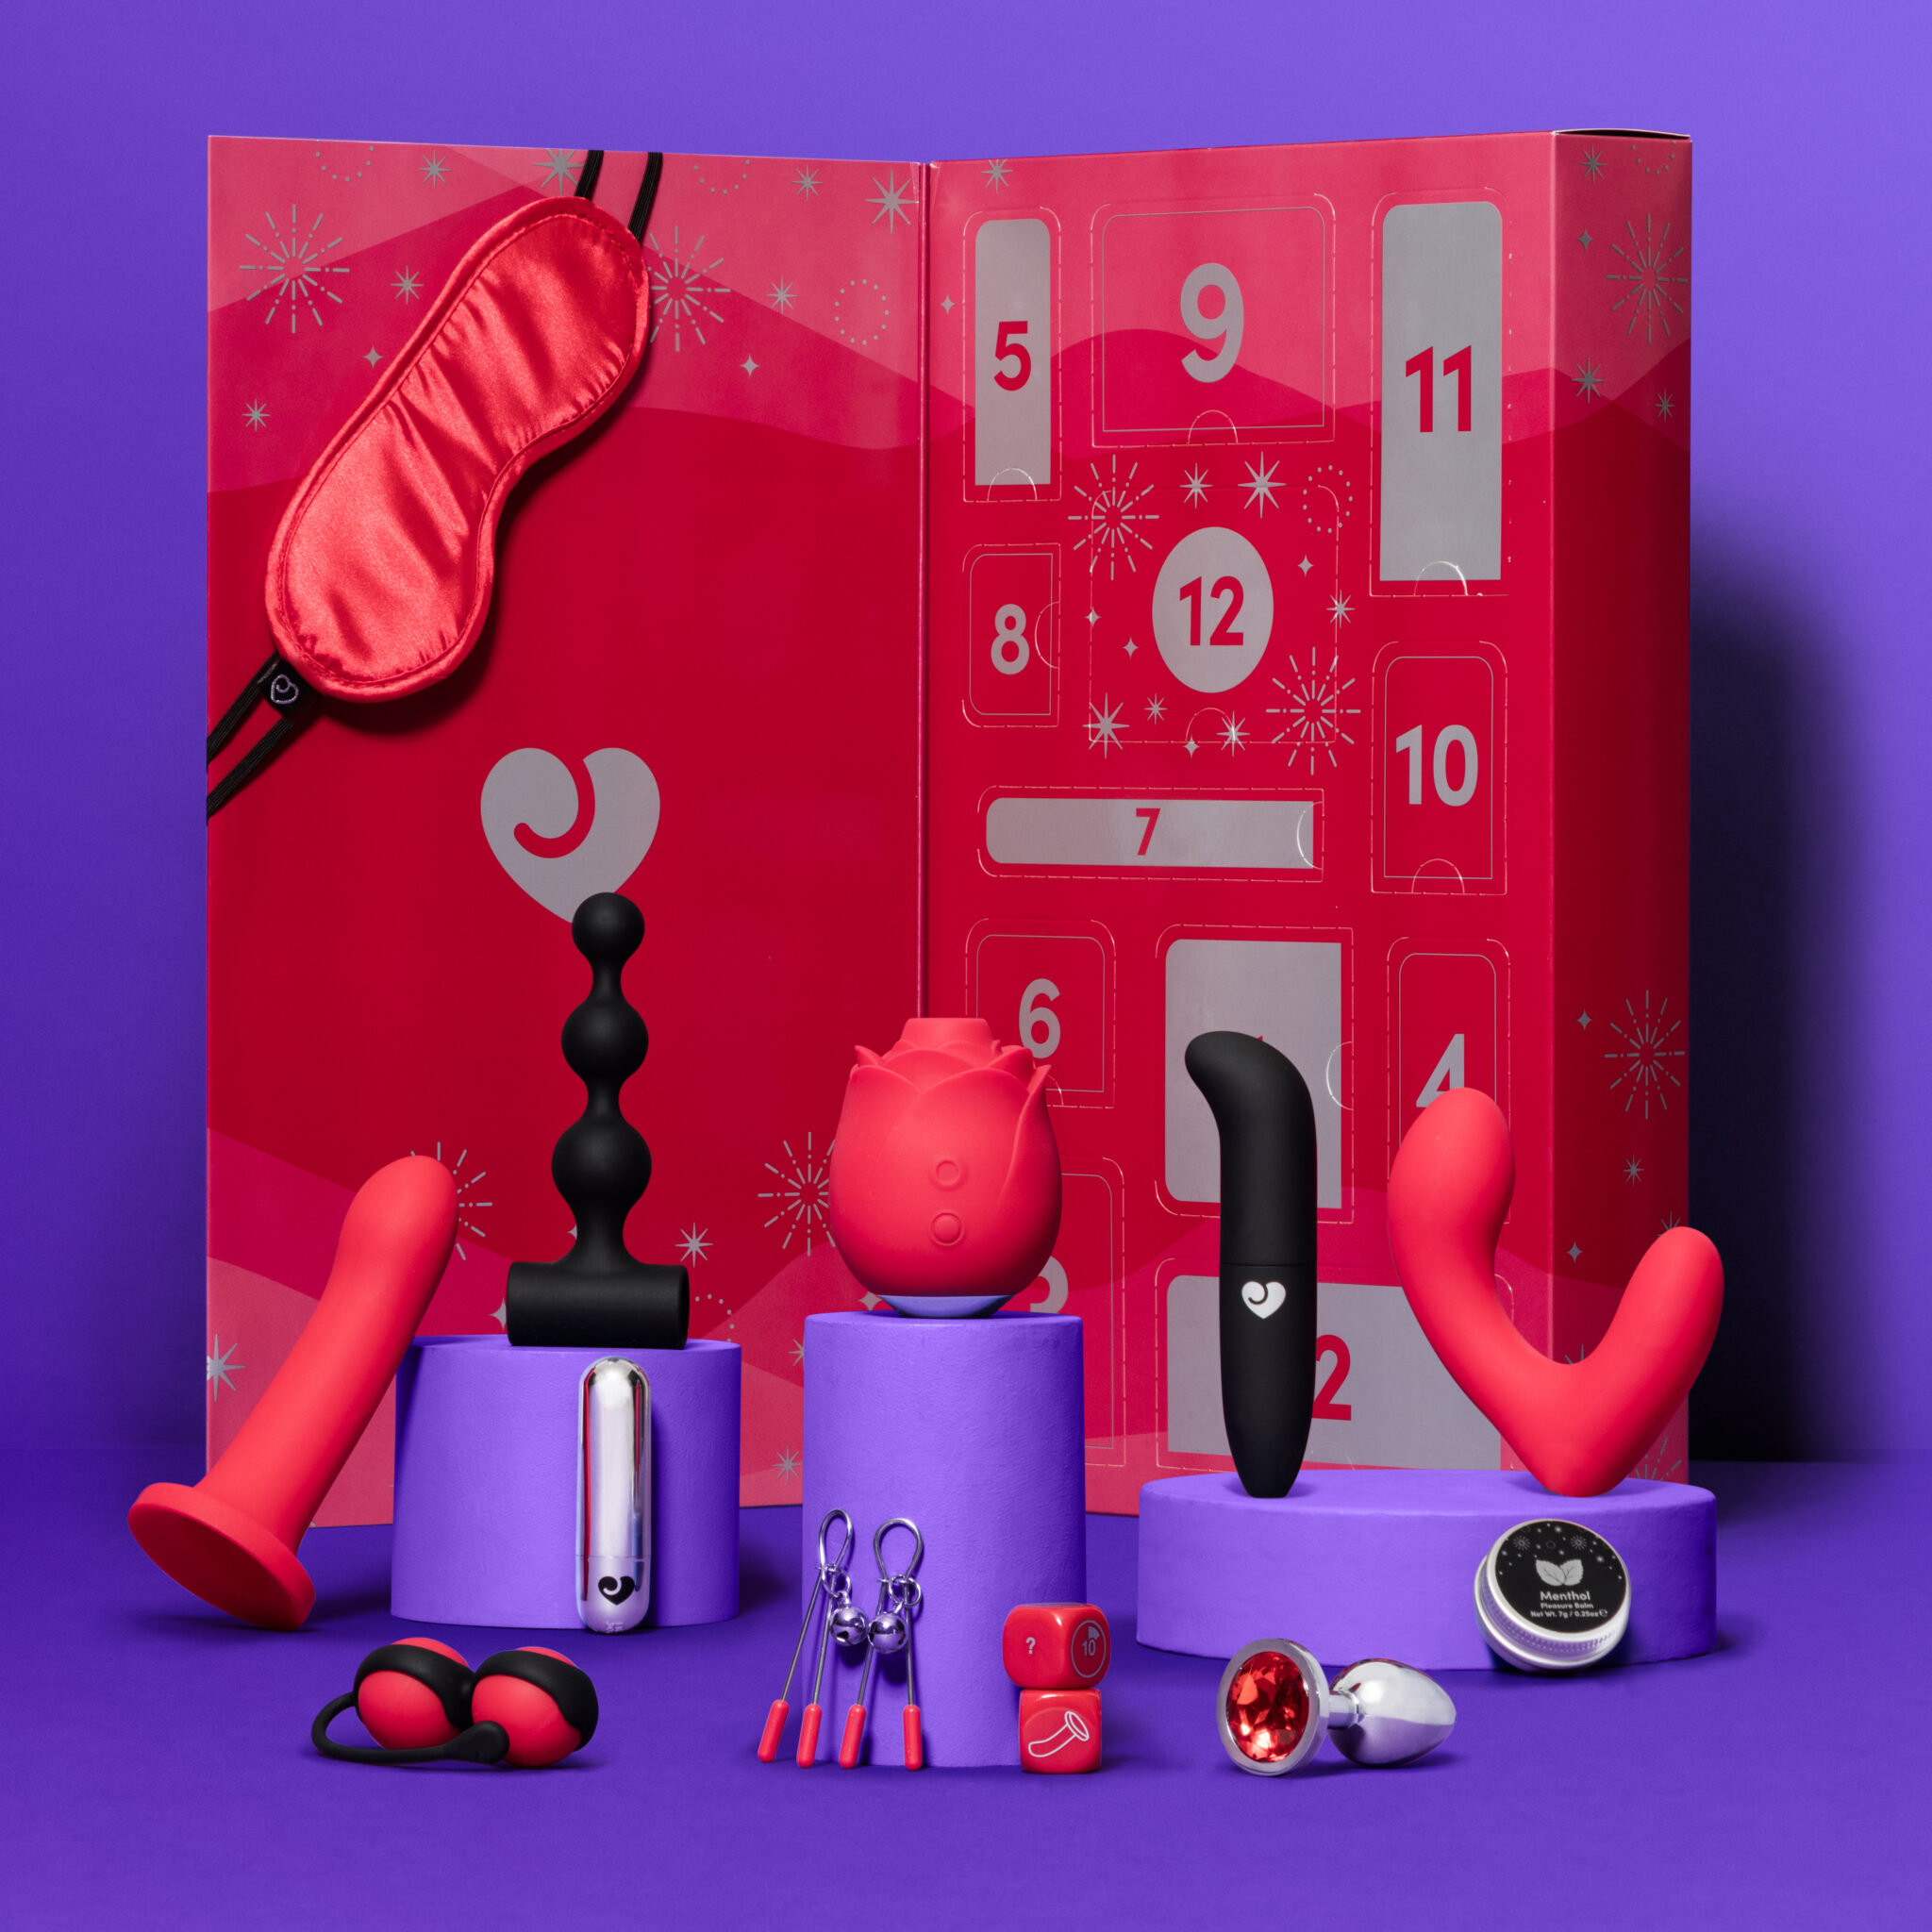 An image of some kinky and bonadge items included in the advent calendar, such as a blindfold, sex dice, and more.